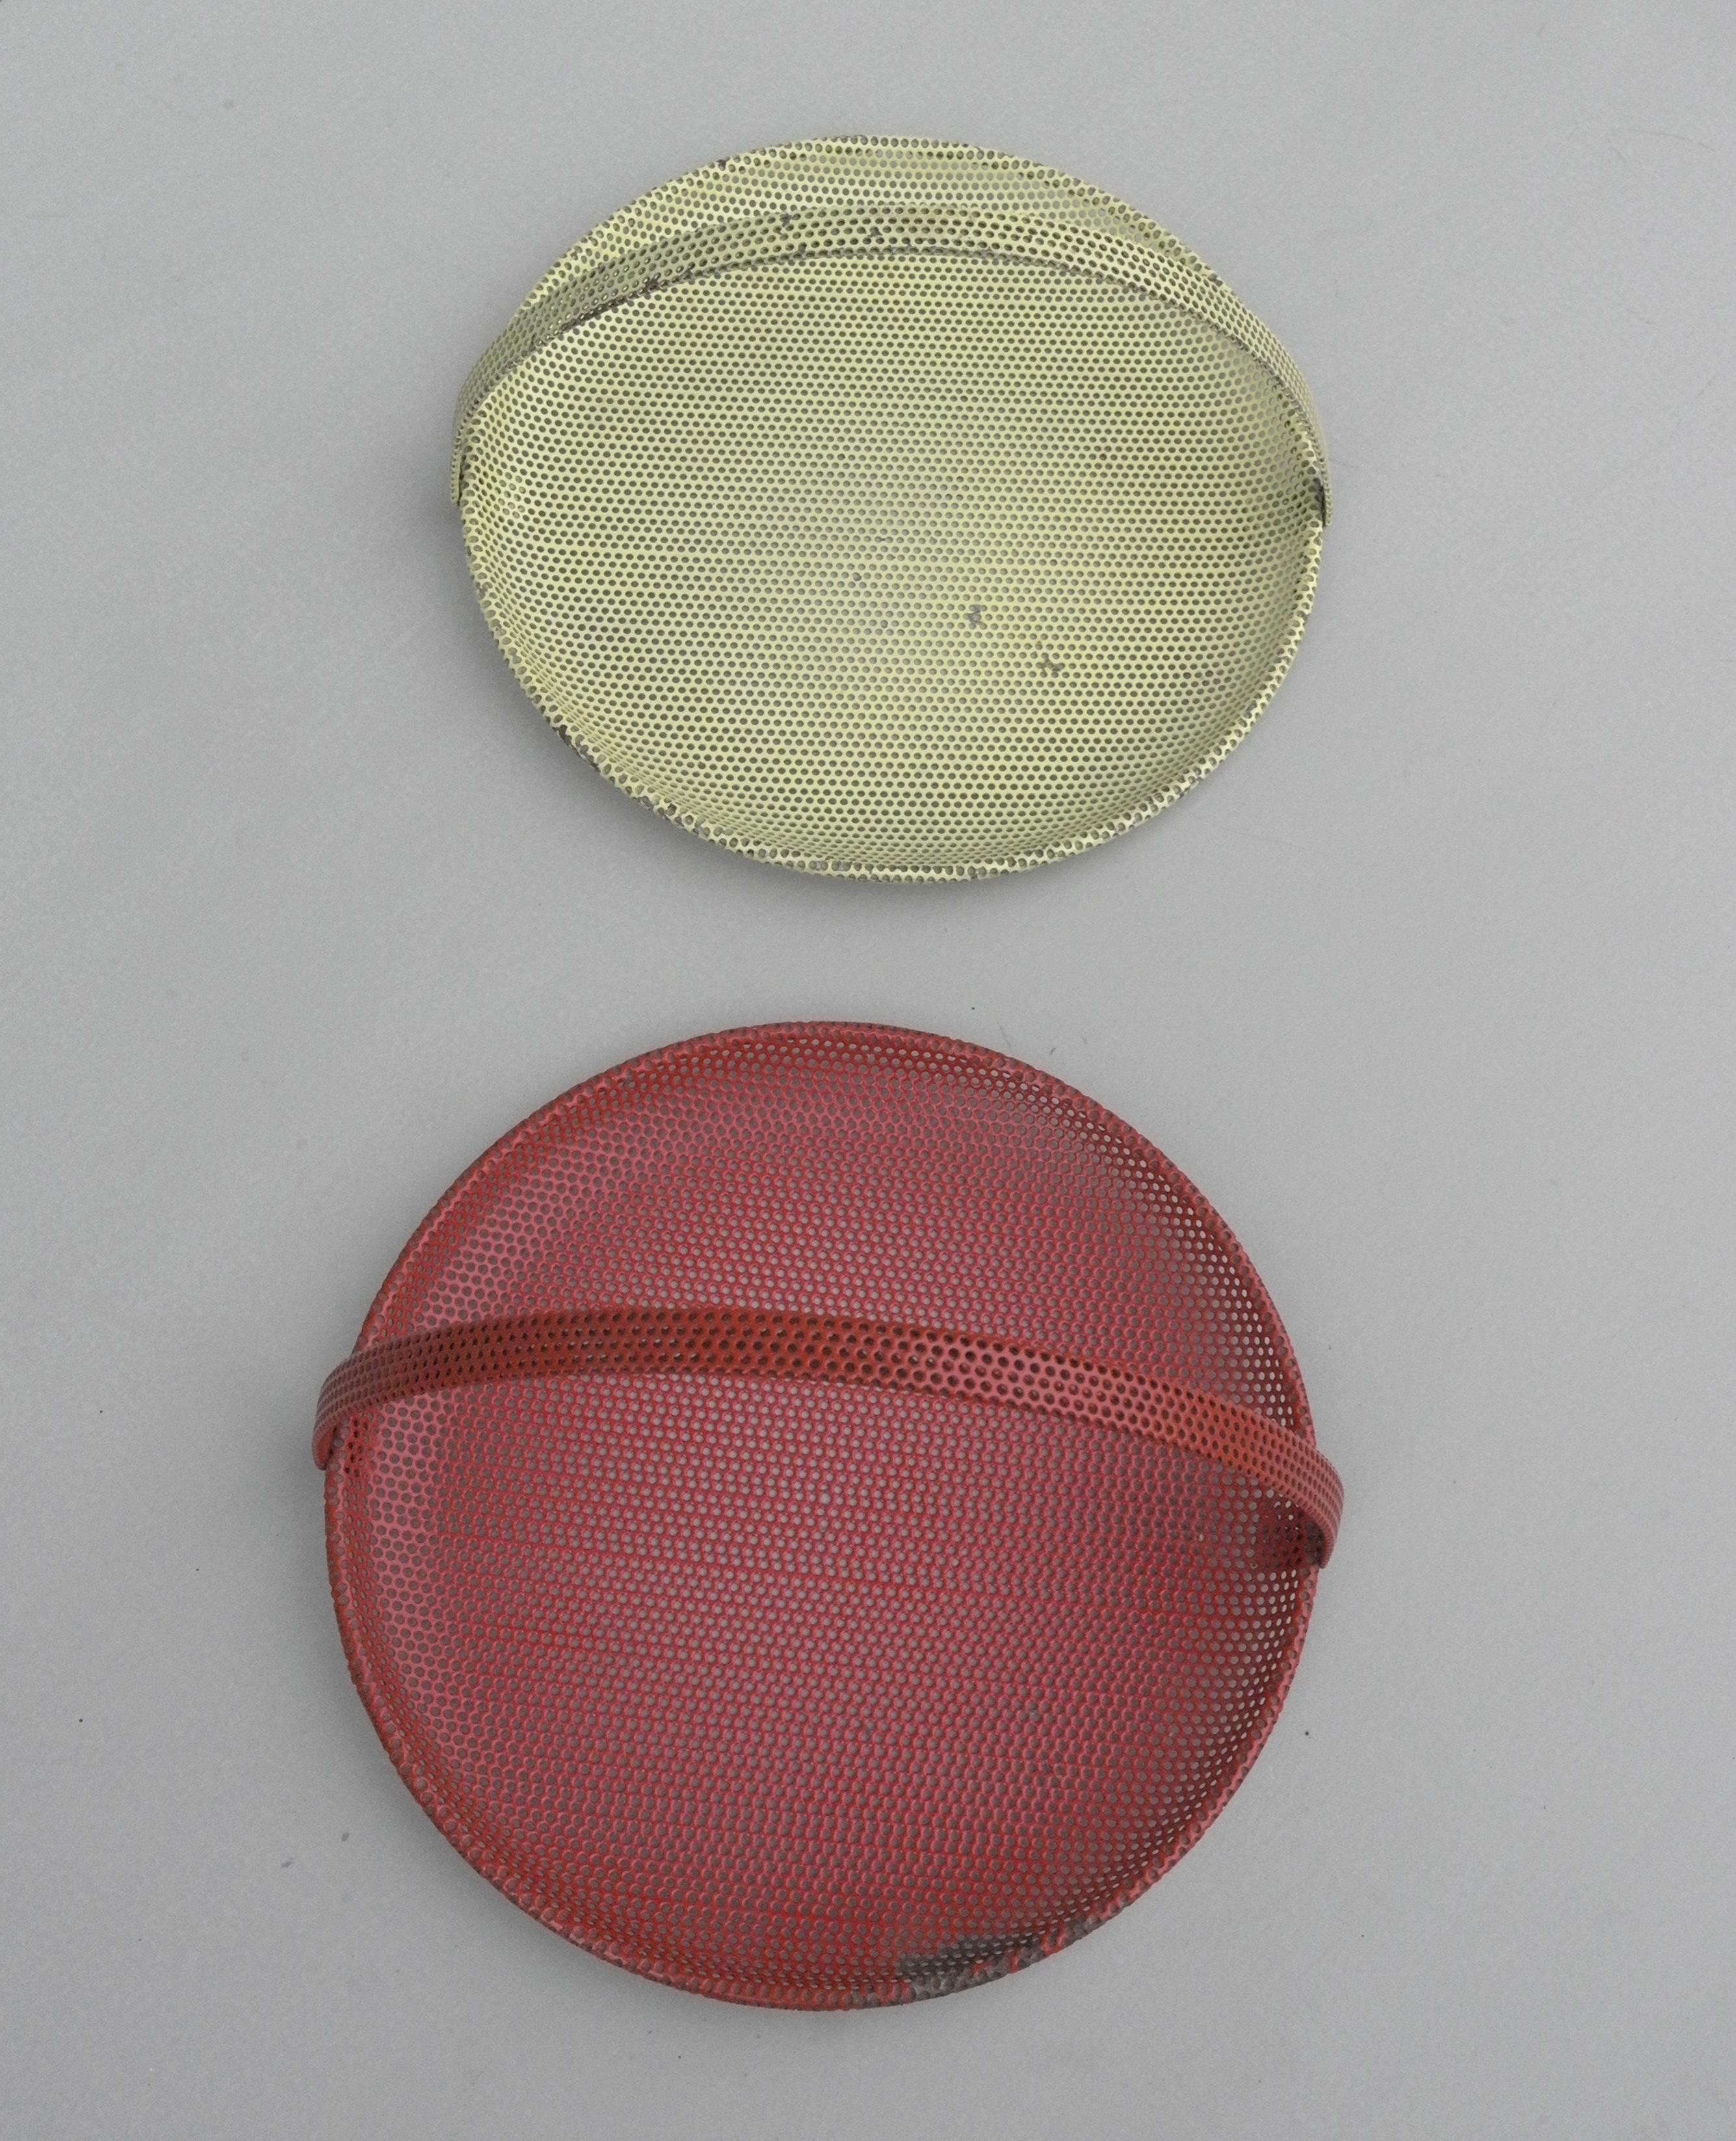 Metal Pair of Mathieu Matégot Bonbonniere in Red and Yellow, France, 1950s For Sale